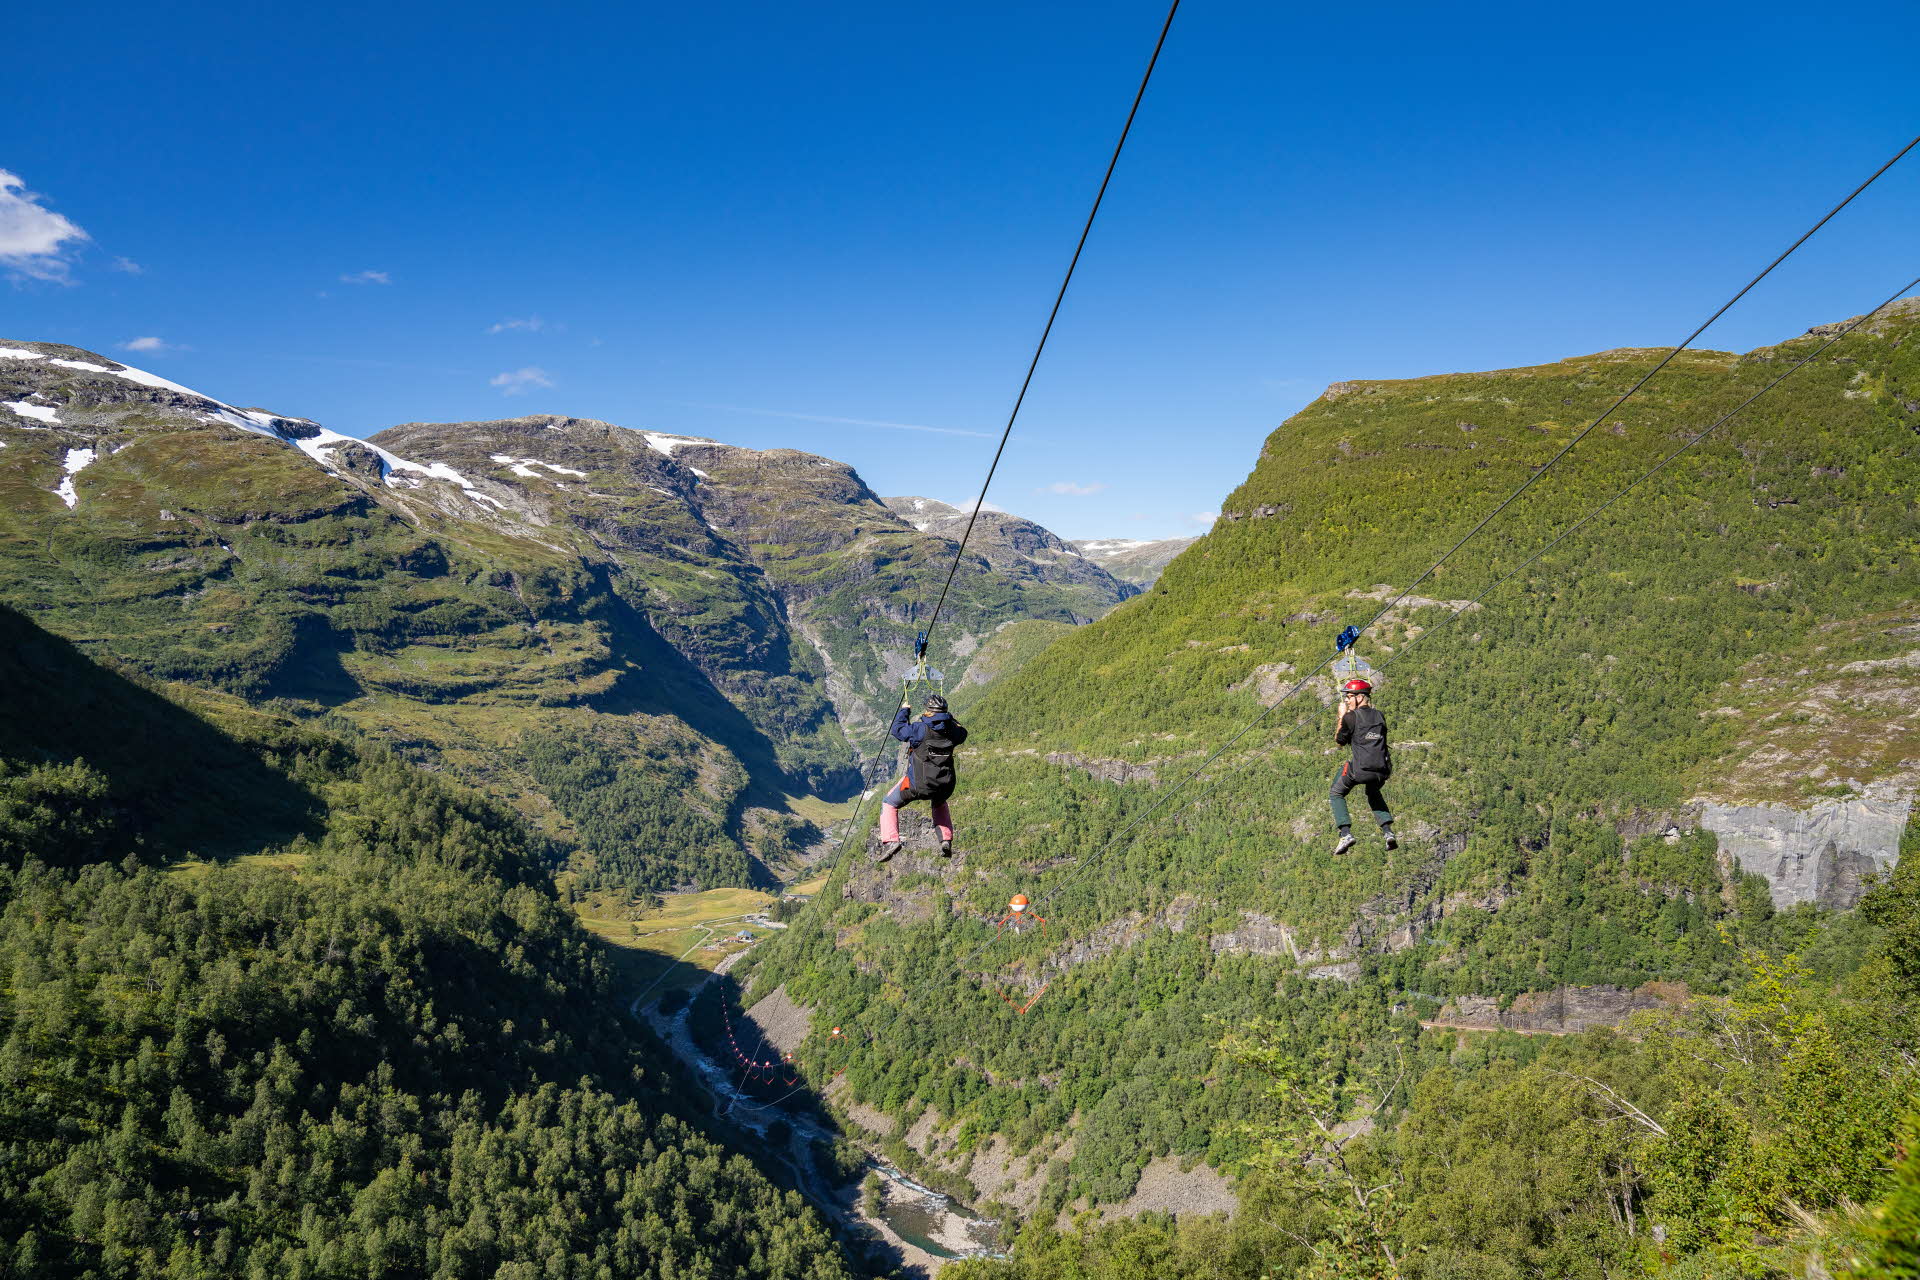 Two people on the Flåm Zipline going down the Flåm Valley on a sunny day. 